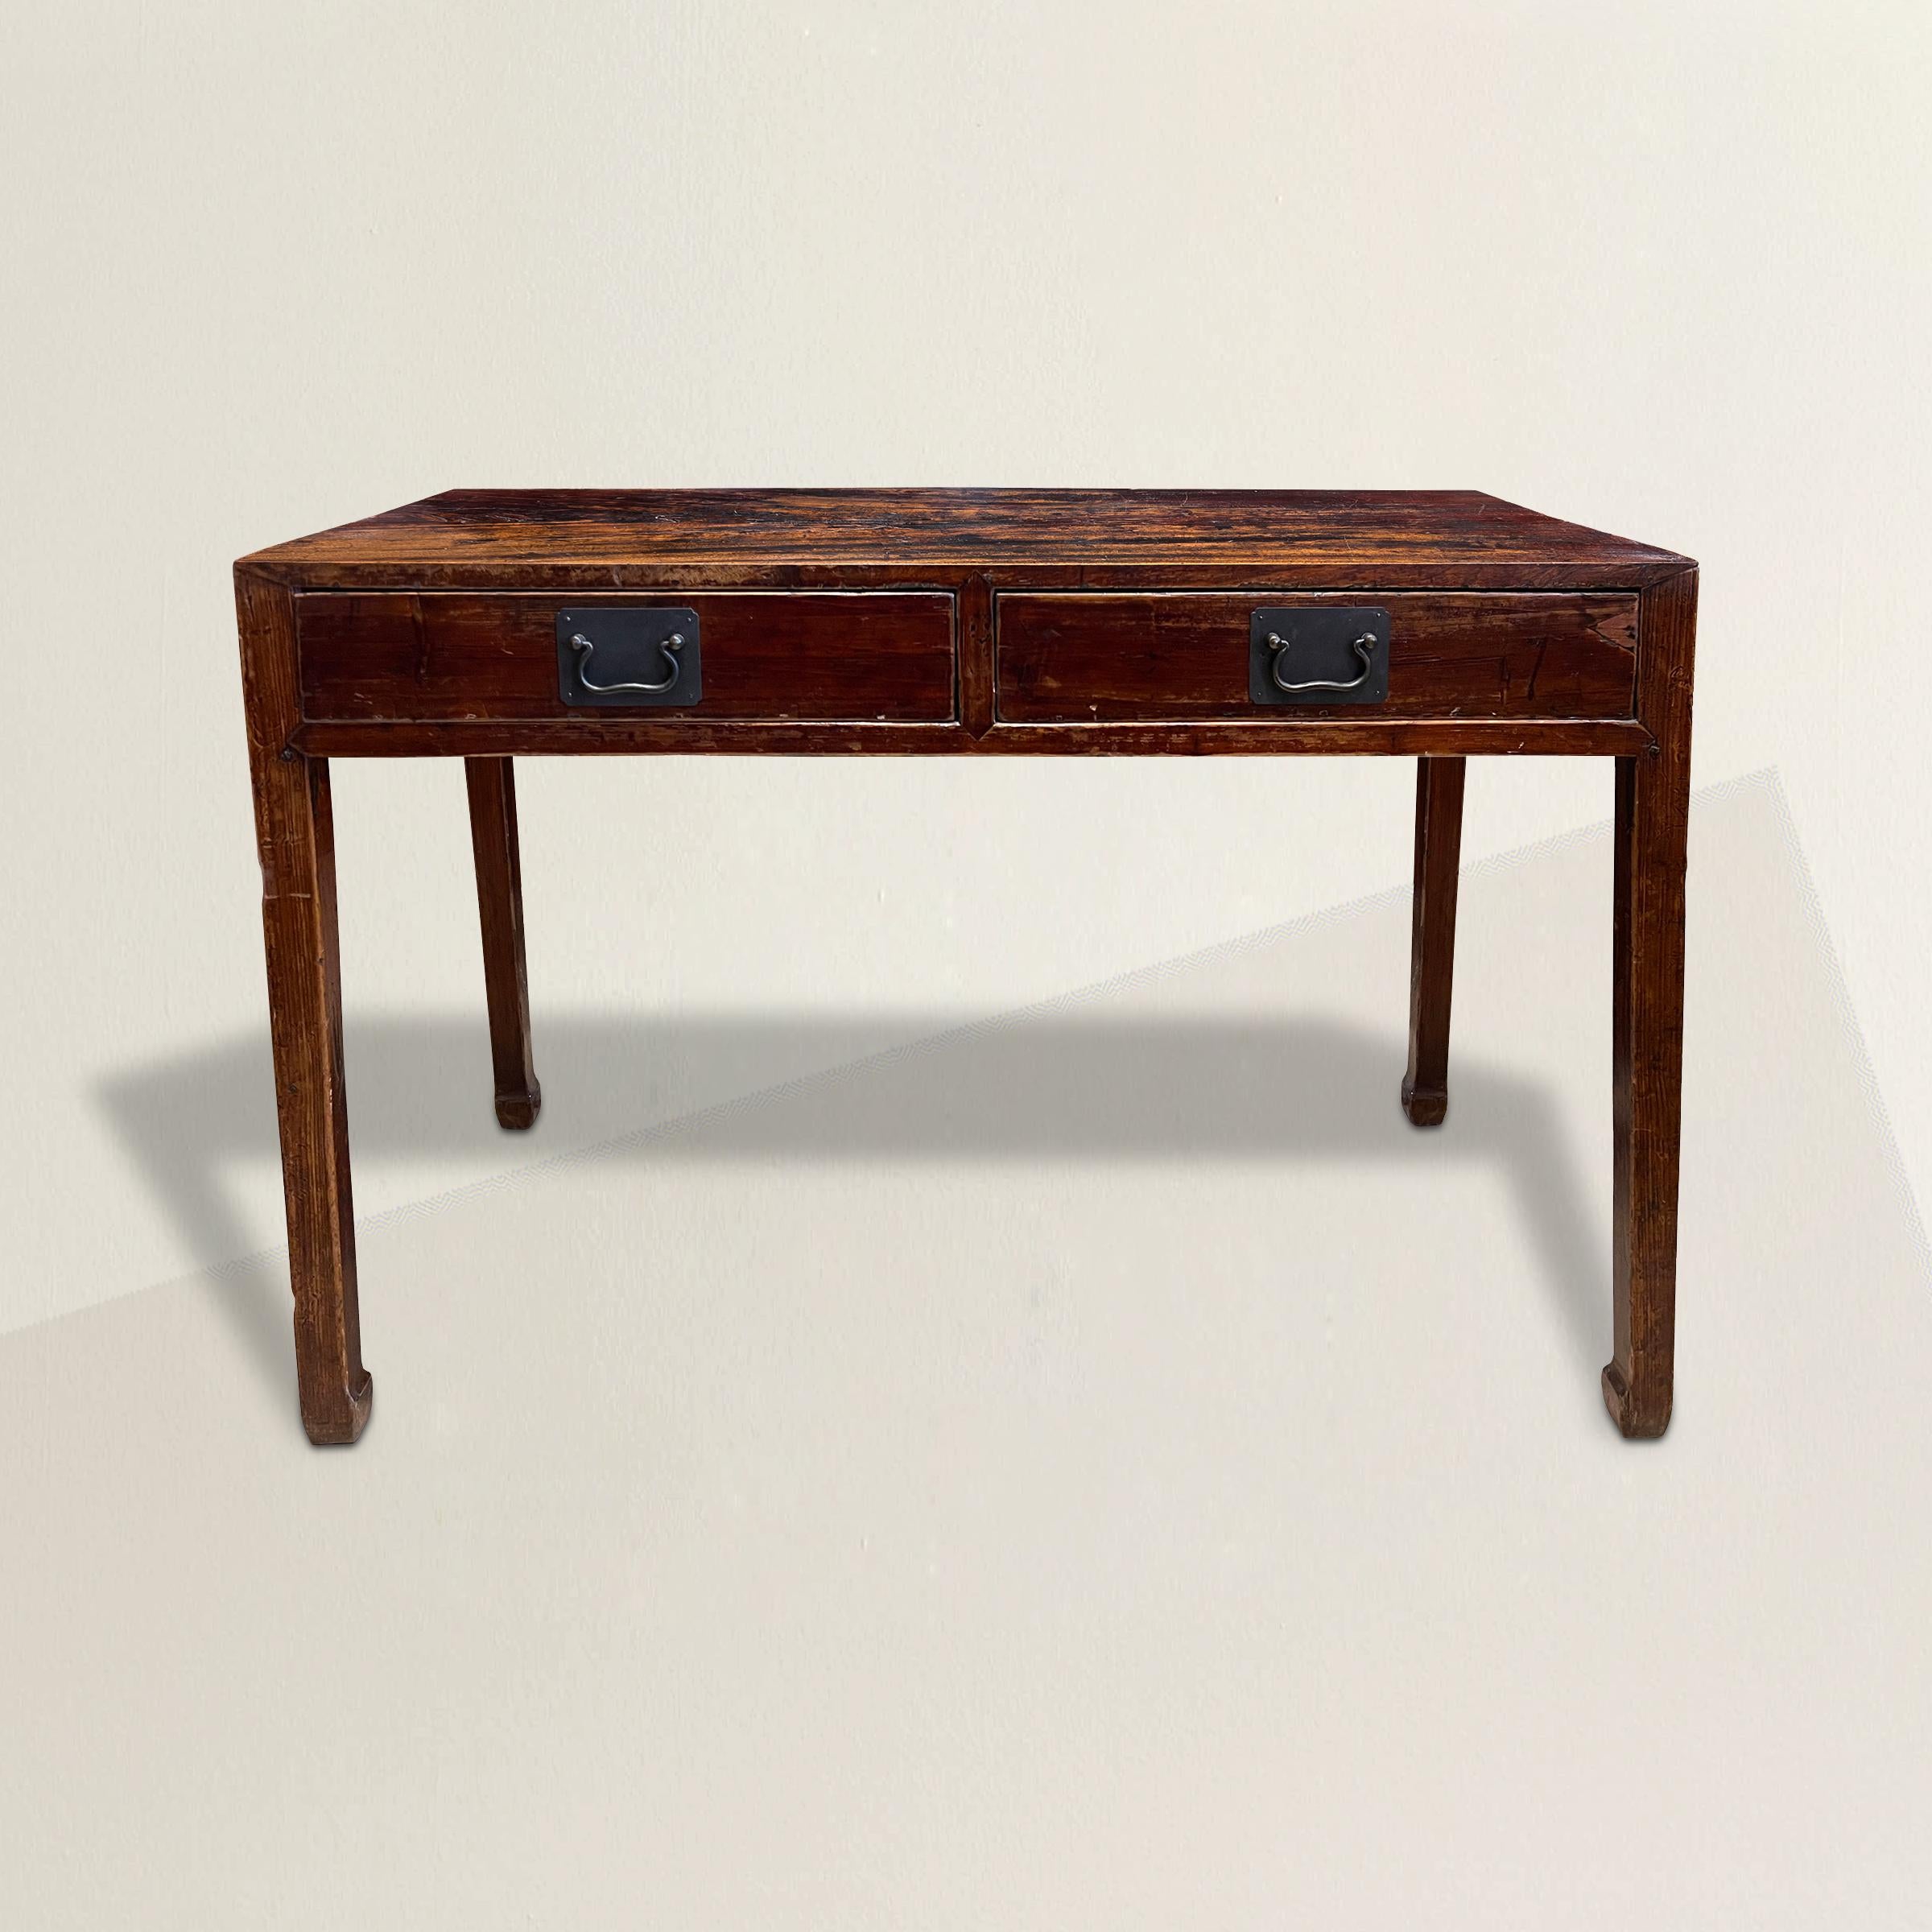 A captivating 19th century Chinese elmwood altar table with two drawers, simple square tapered legs ending in horse-hoof feet, and with a well-worn sangre-de-boeuf lacquer. The perfect console table in your entry, bedroom, or behind the sofa in your